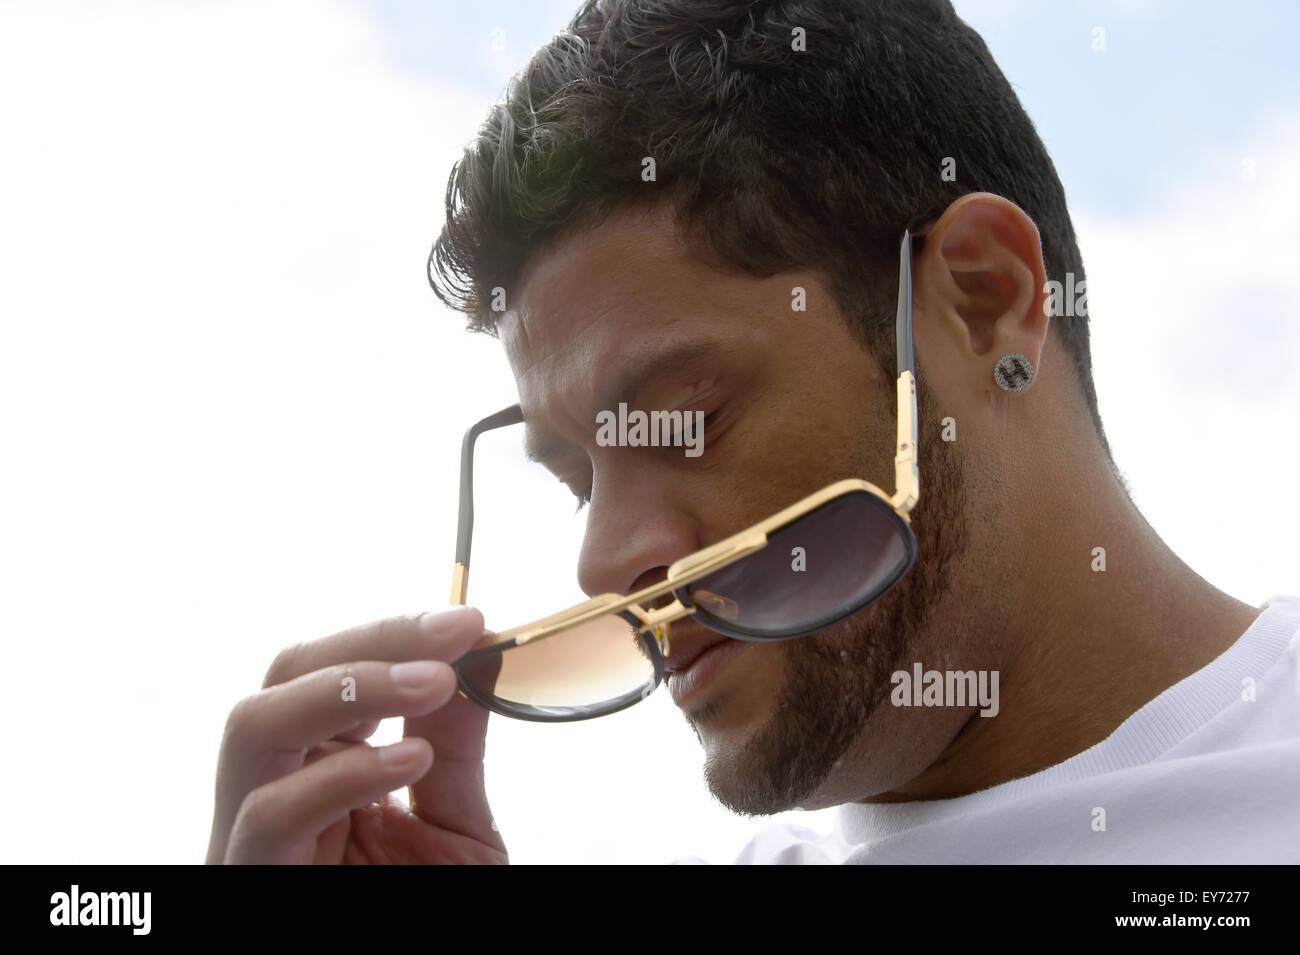 Brazilian national player and player of FC Zenit St. Petersburg, Hulk, pus on his sunglasses on the training grounds in St. Petersburg, Russia, 20 July 2015. Racist comments are part of the everyday life in Russian soccer, Hulk said. 'That happens during every match in the Russian league. I used to get mad. Today I blow the supporters kisses', the striker said on Monday. Photo: Marcus Brandt/dpa Stock Photo